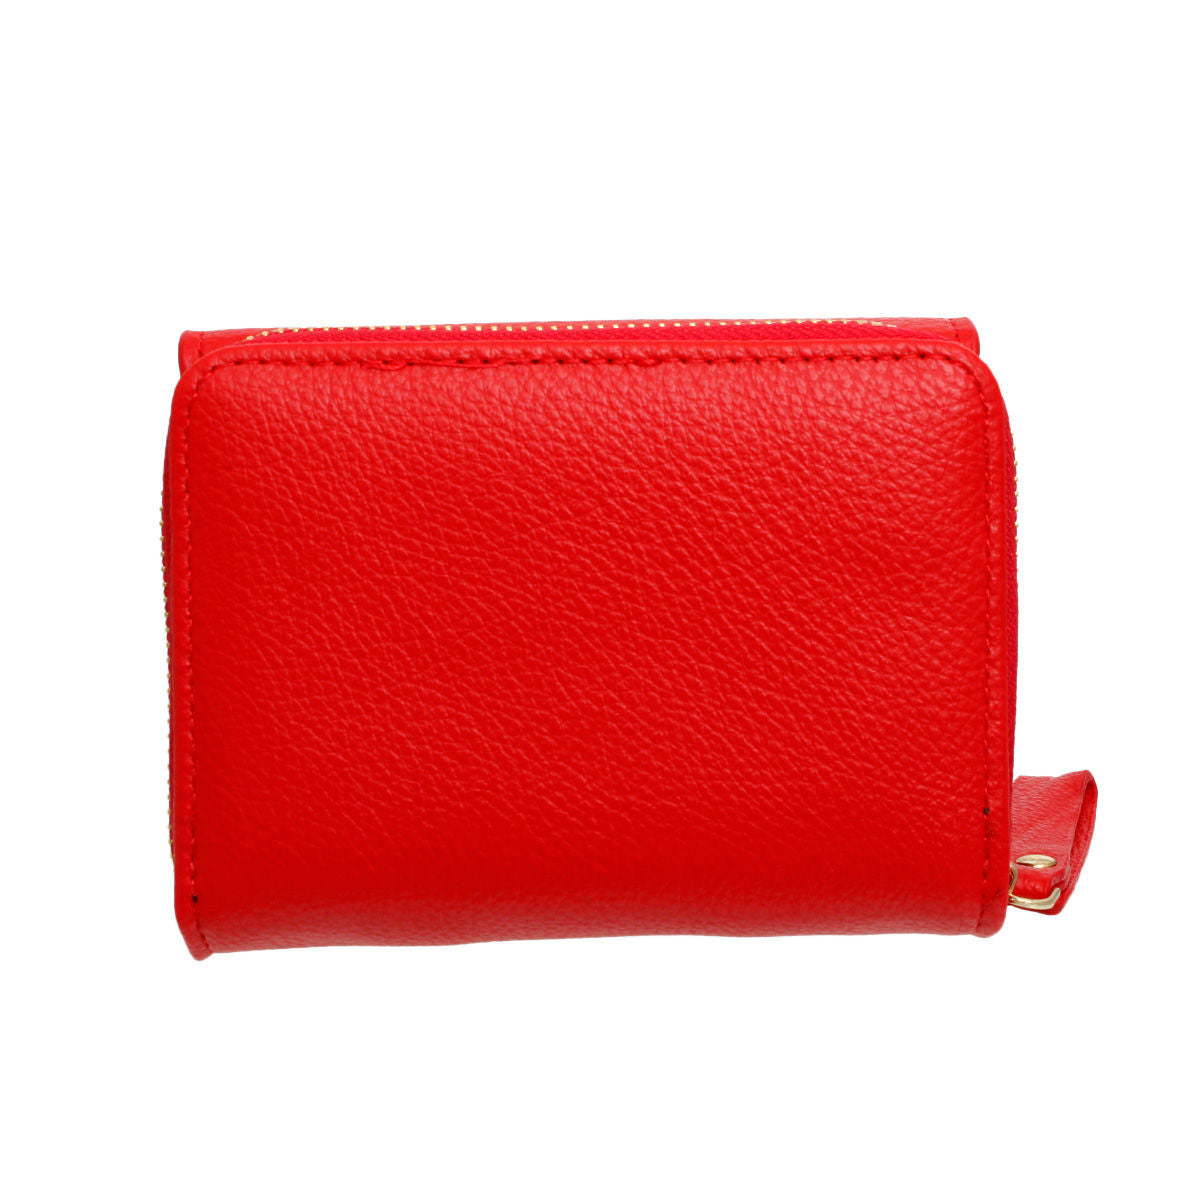 Accordian Wallet Red Snap Cardholder for Women